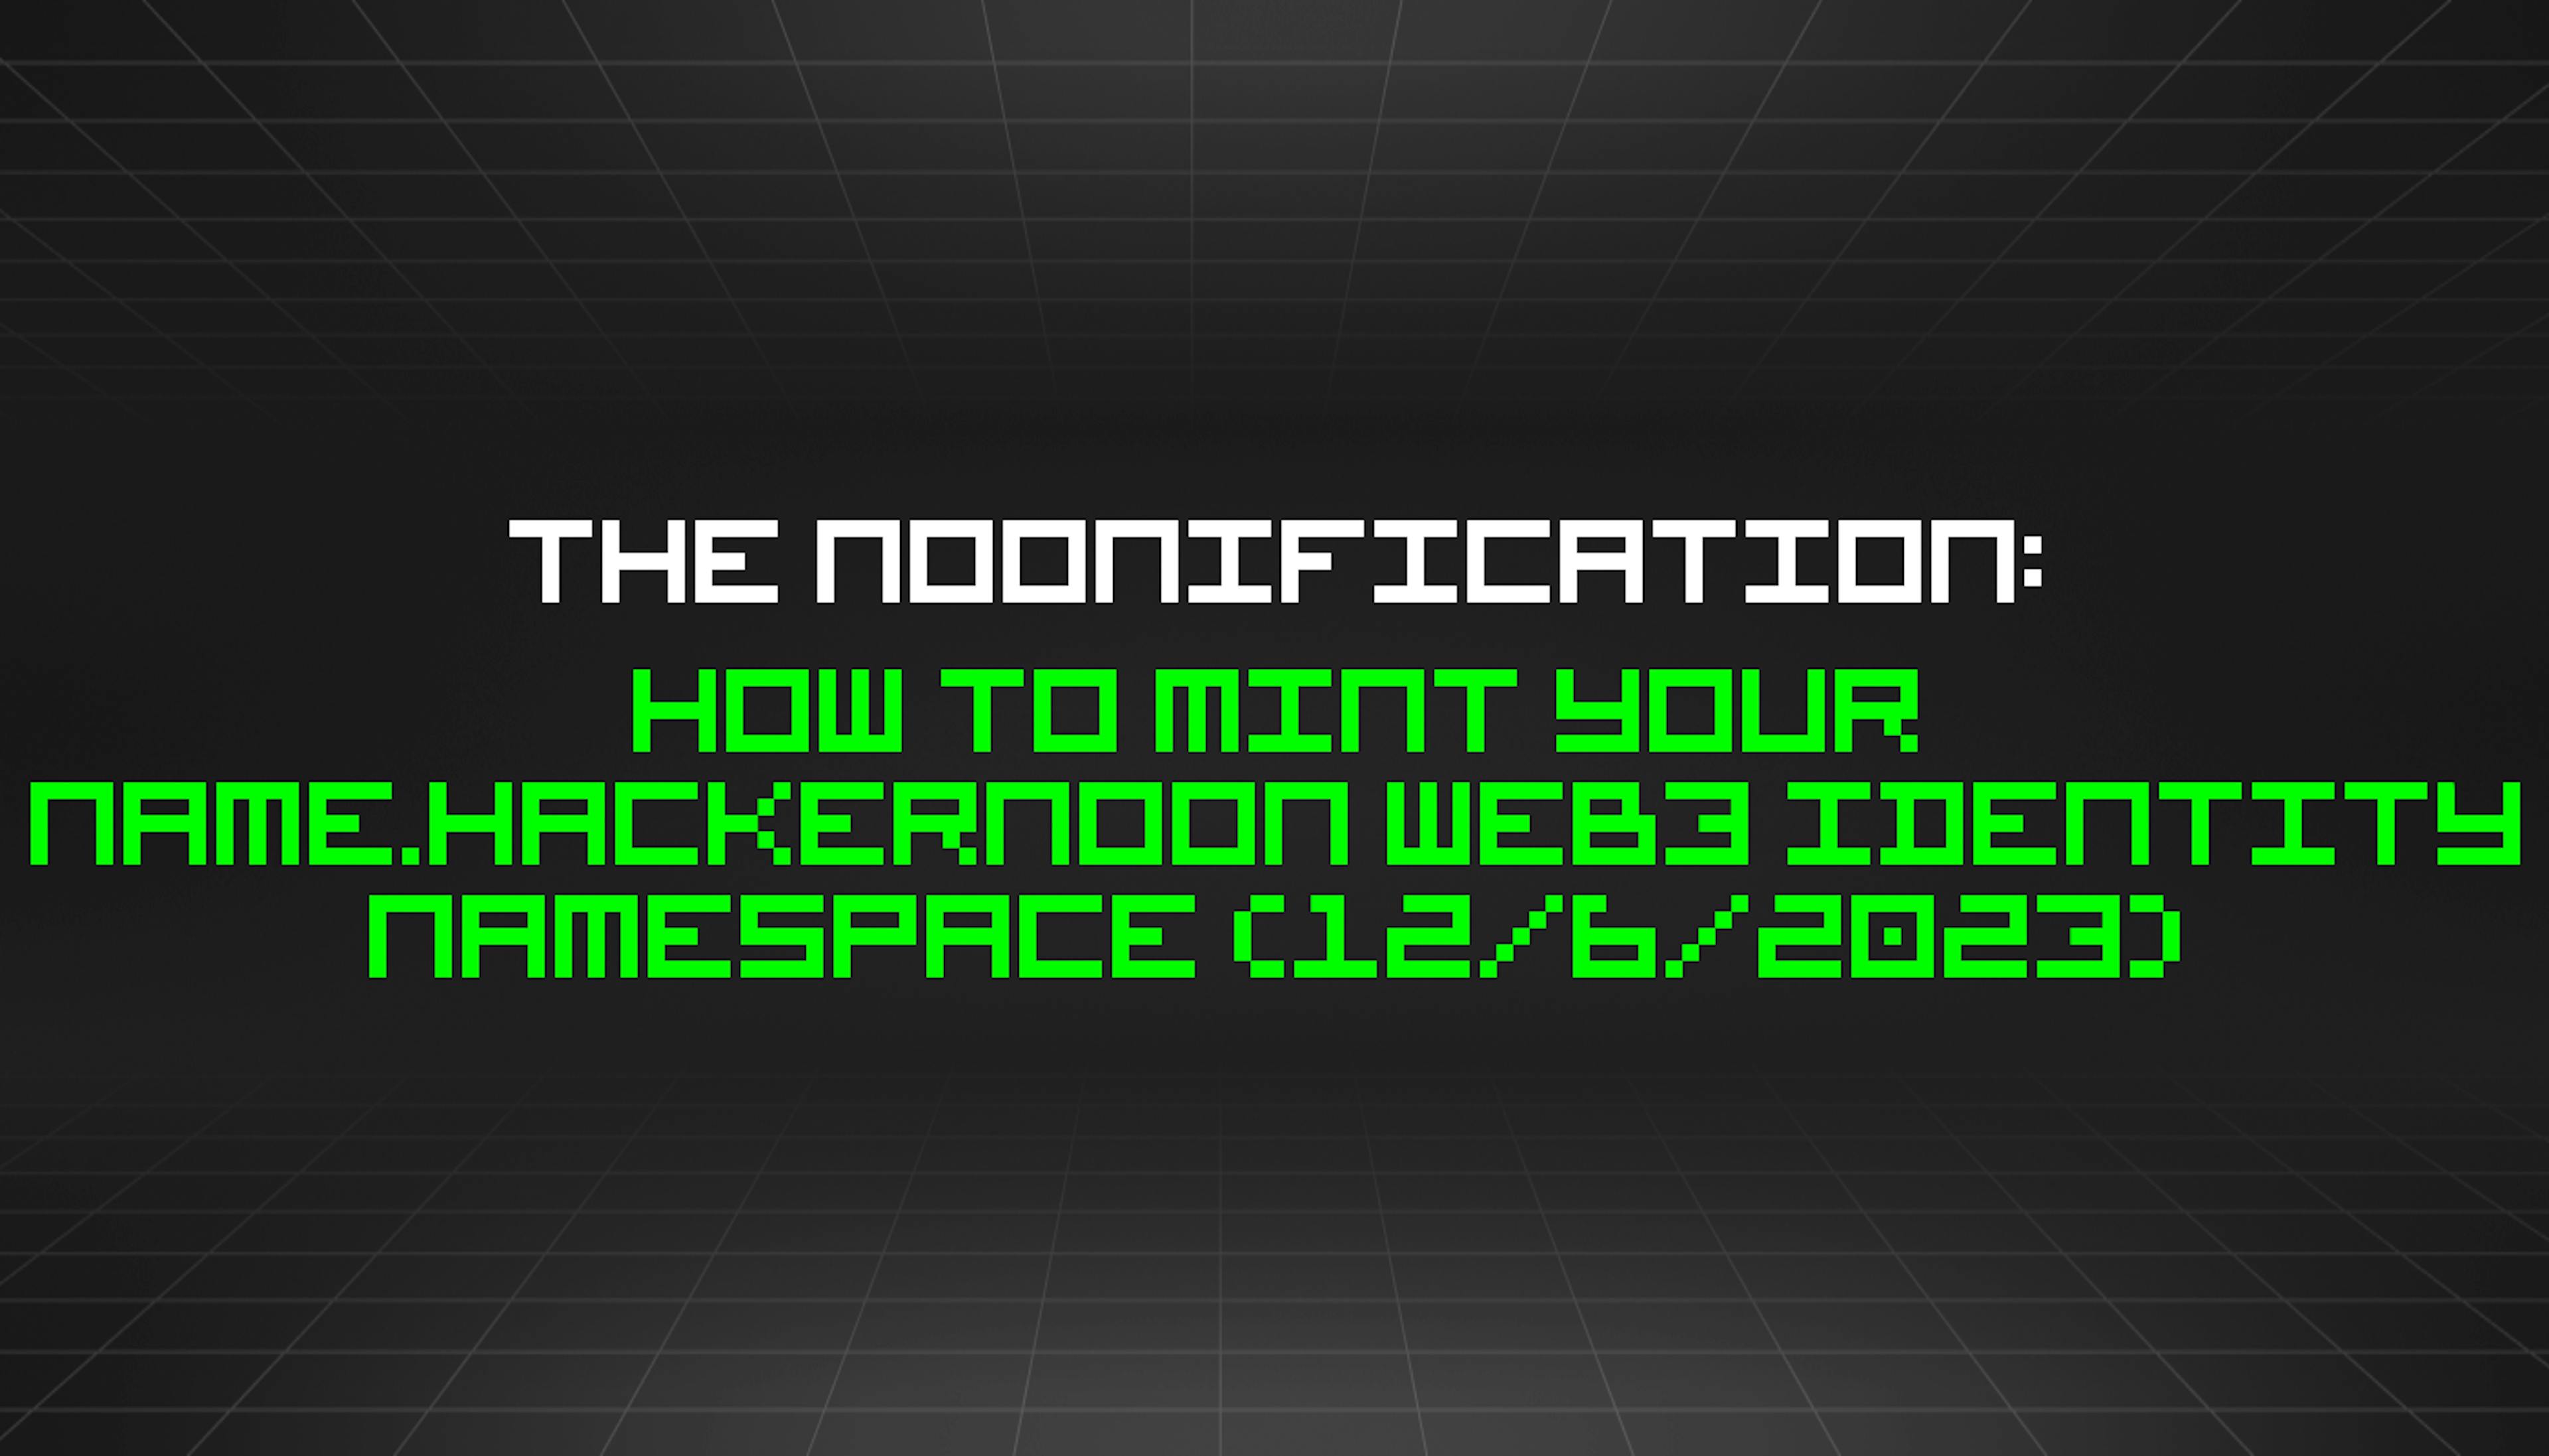 featured image - The Noonification: How to Mint Your Name.HackerNoon Web3 Identity Namespace (12/6/2023)